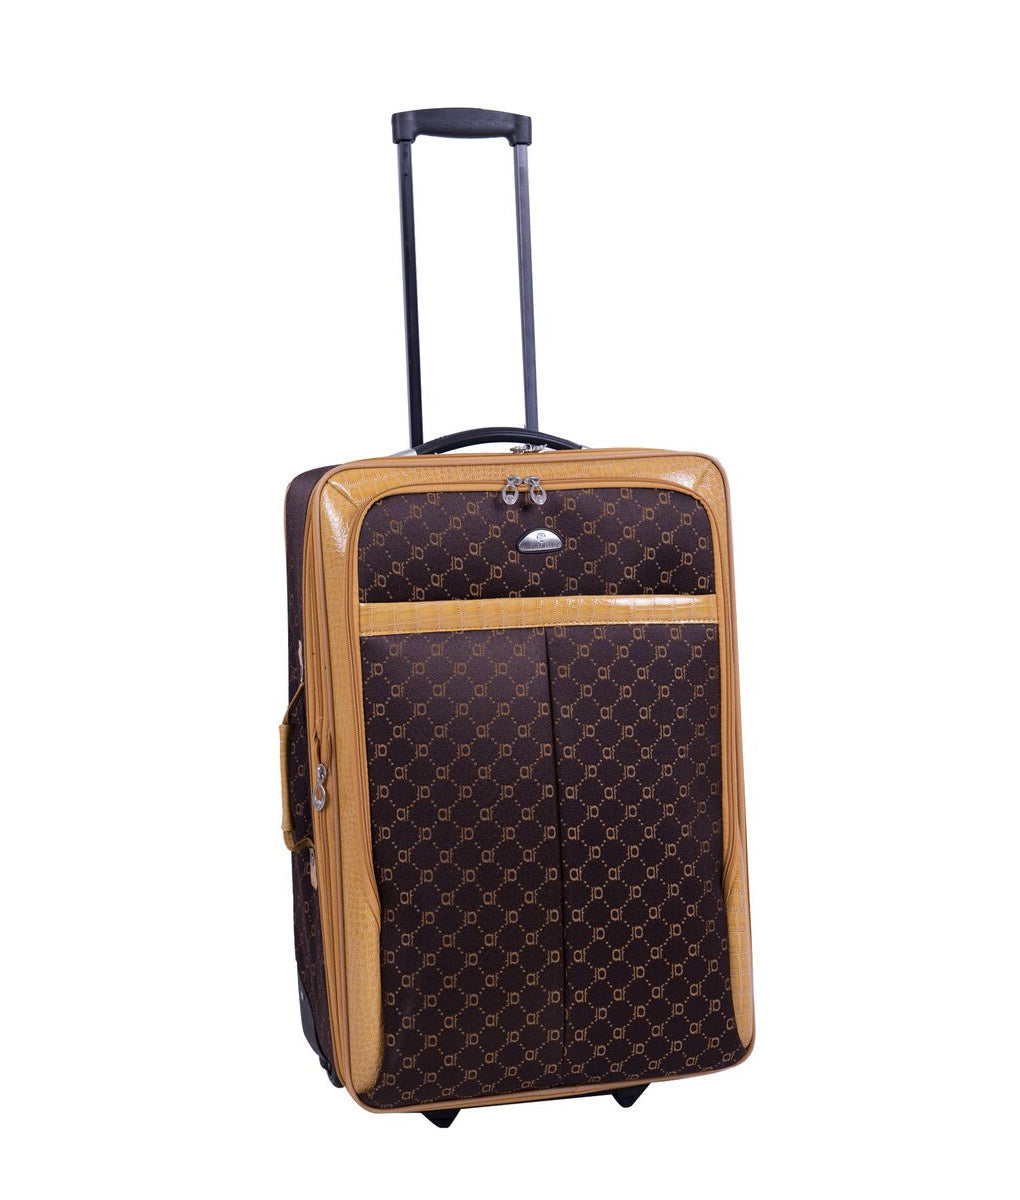 American Flyer Signature 4pc Softside Luggage Set - Brown : Target